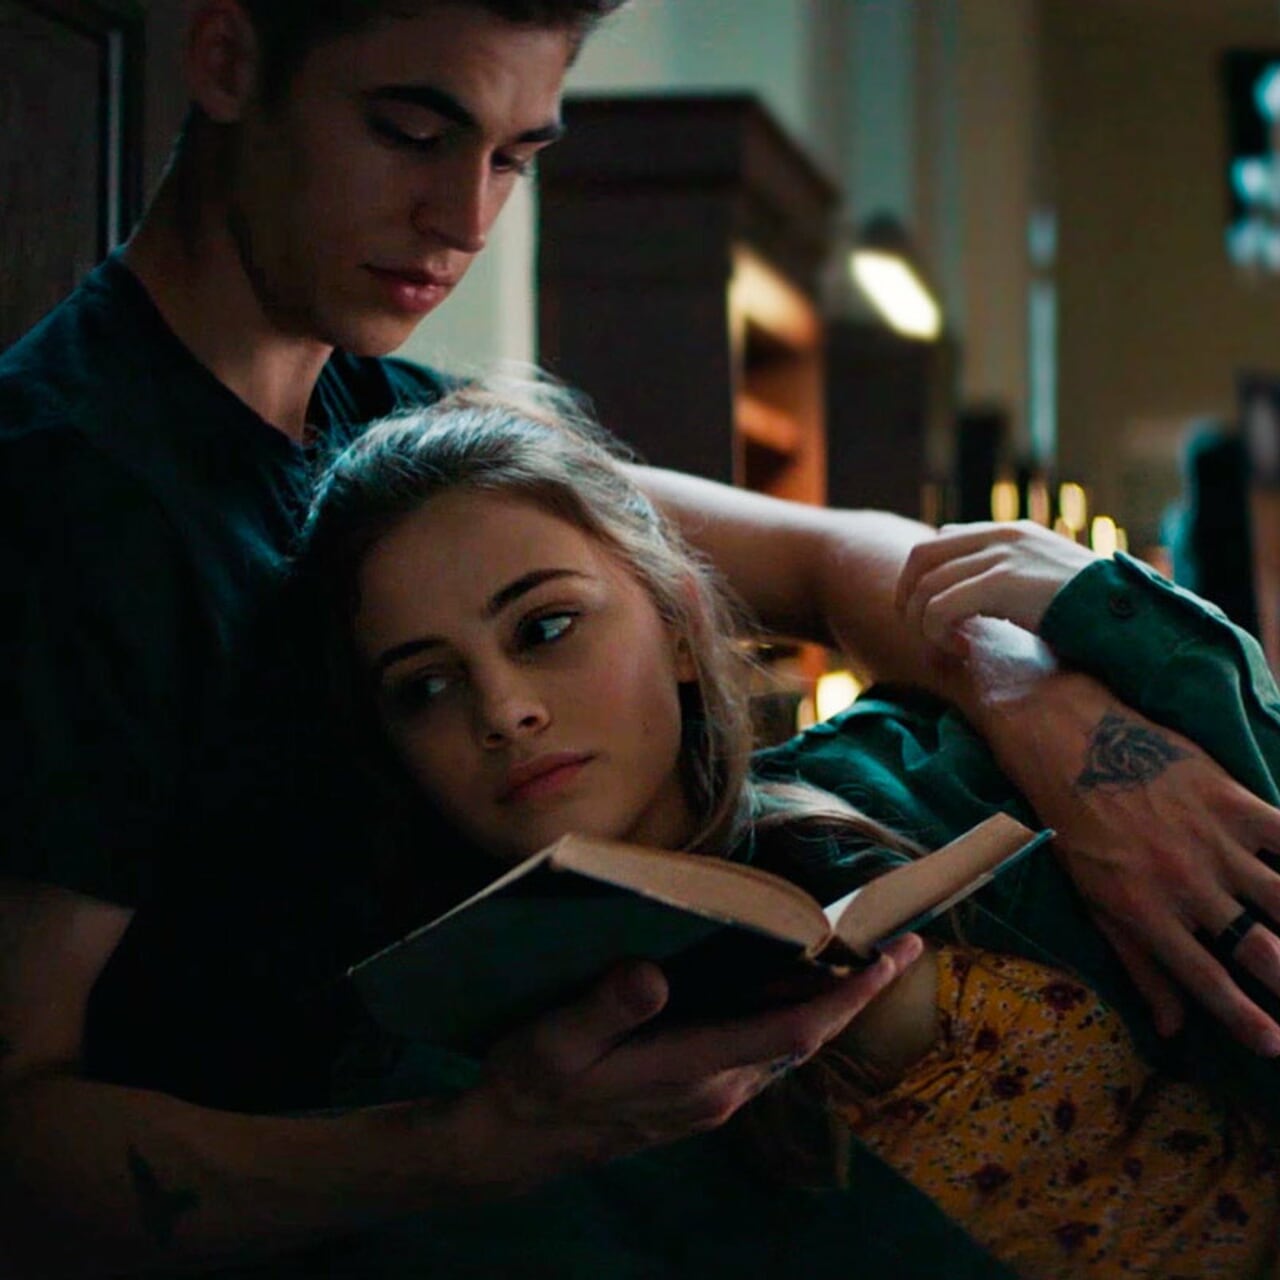 image about AFTER. See more about hardin scott, hero fiennes tiffin and hessa